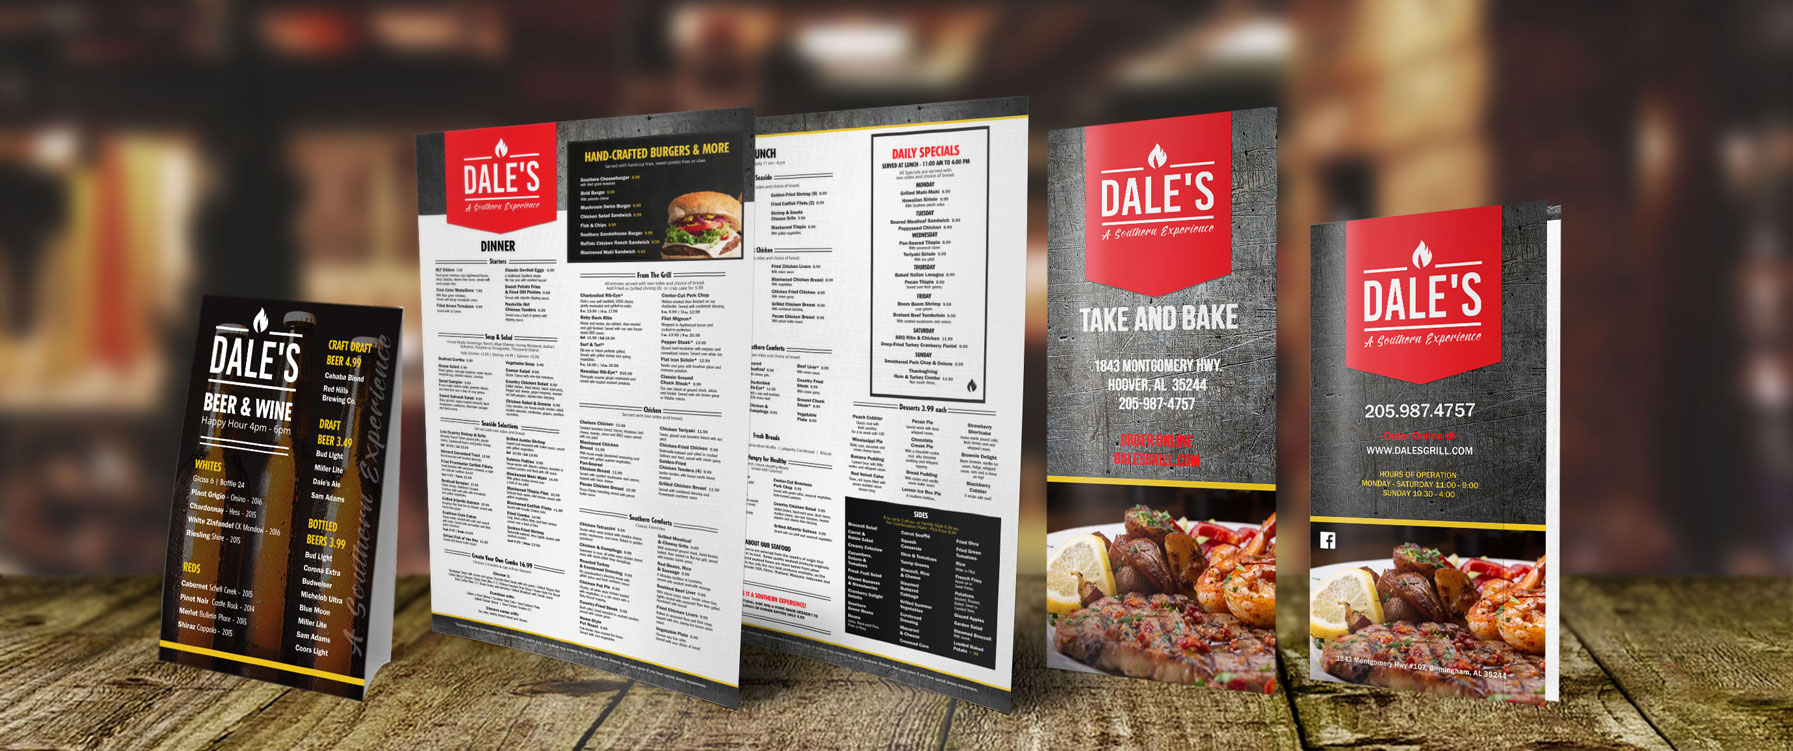 Graphic Design for dine-in, takeout and specialty menus